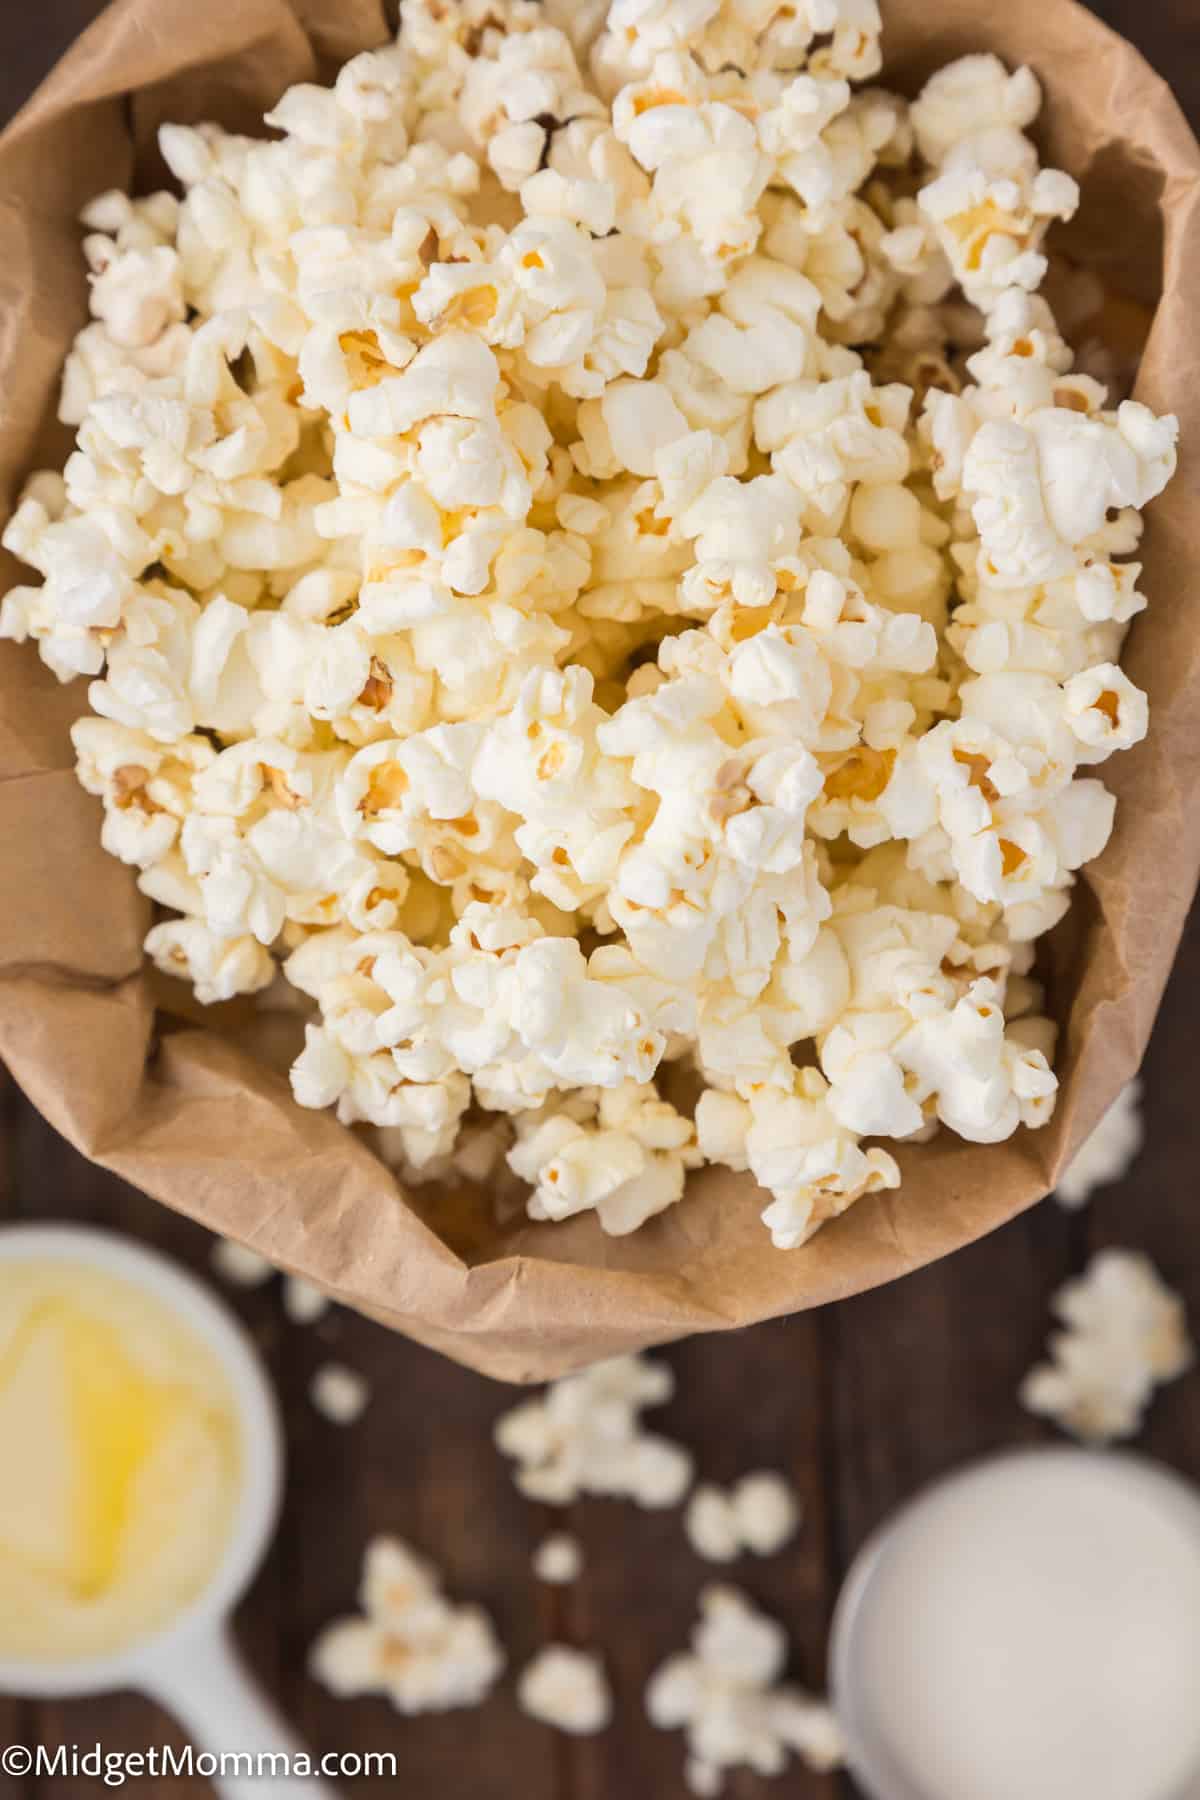 A bag of popcorn with some kernels spilled over, accompanied by a bowl of butter.